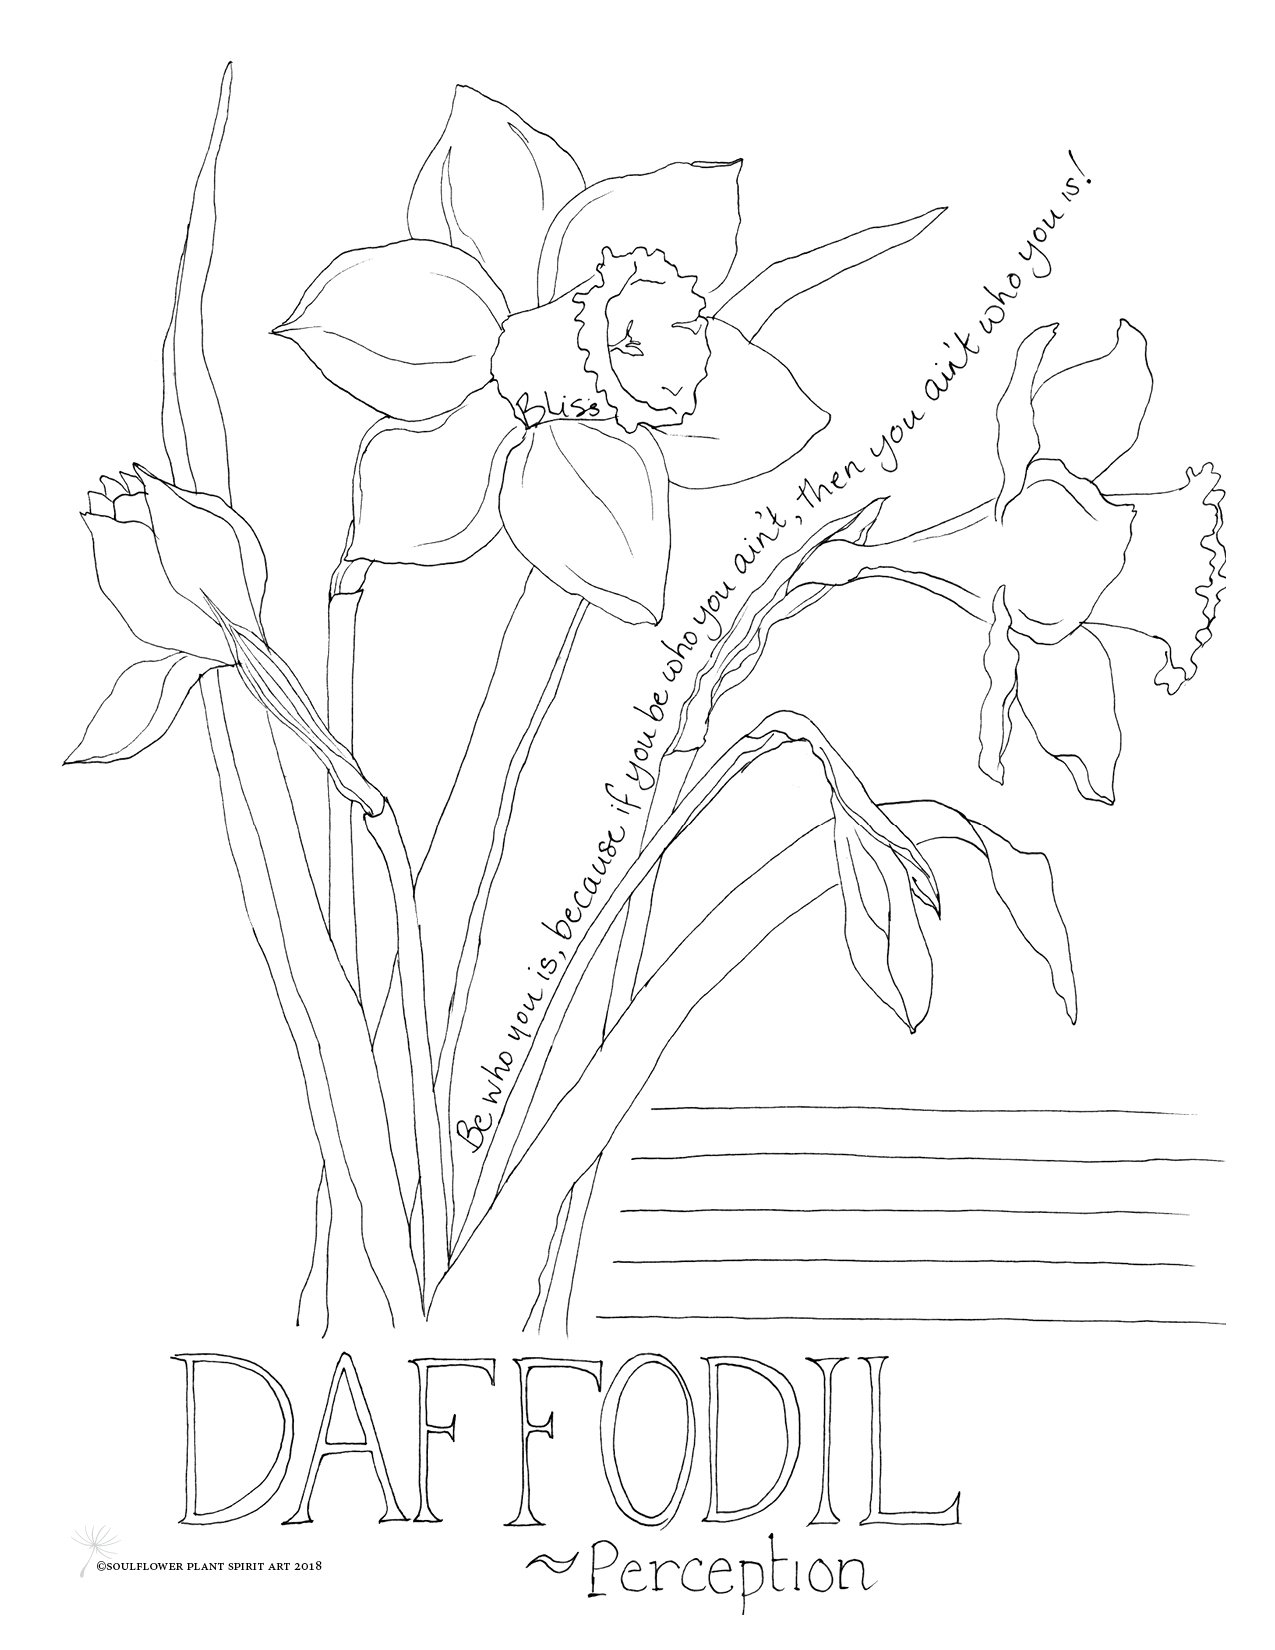 Daffodil (Perception) Coloring Page - My Soulflower